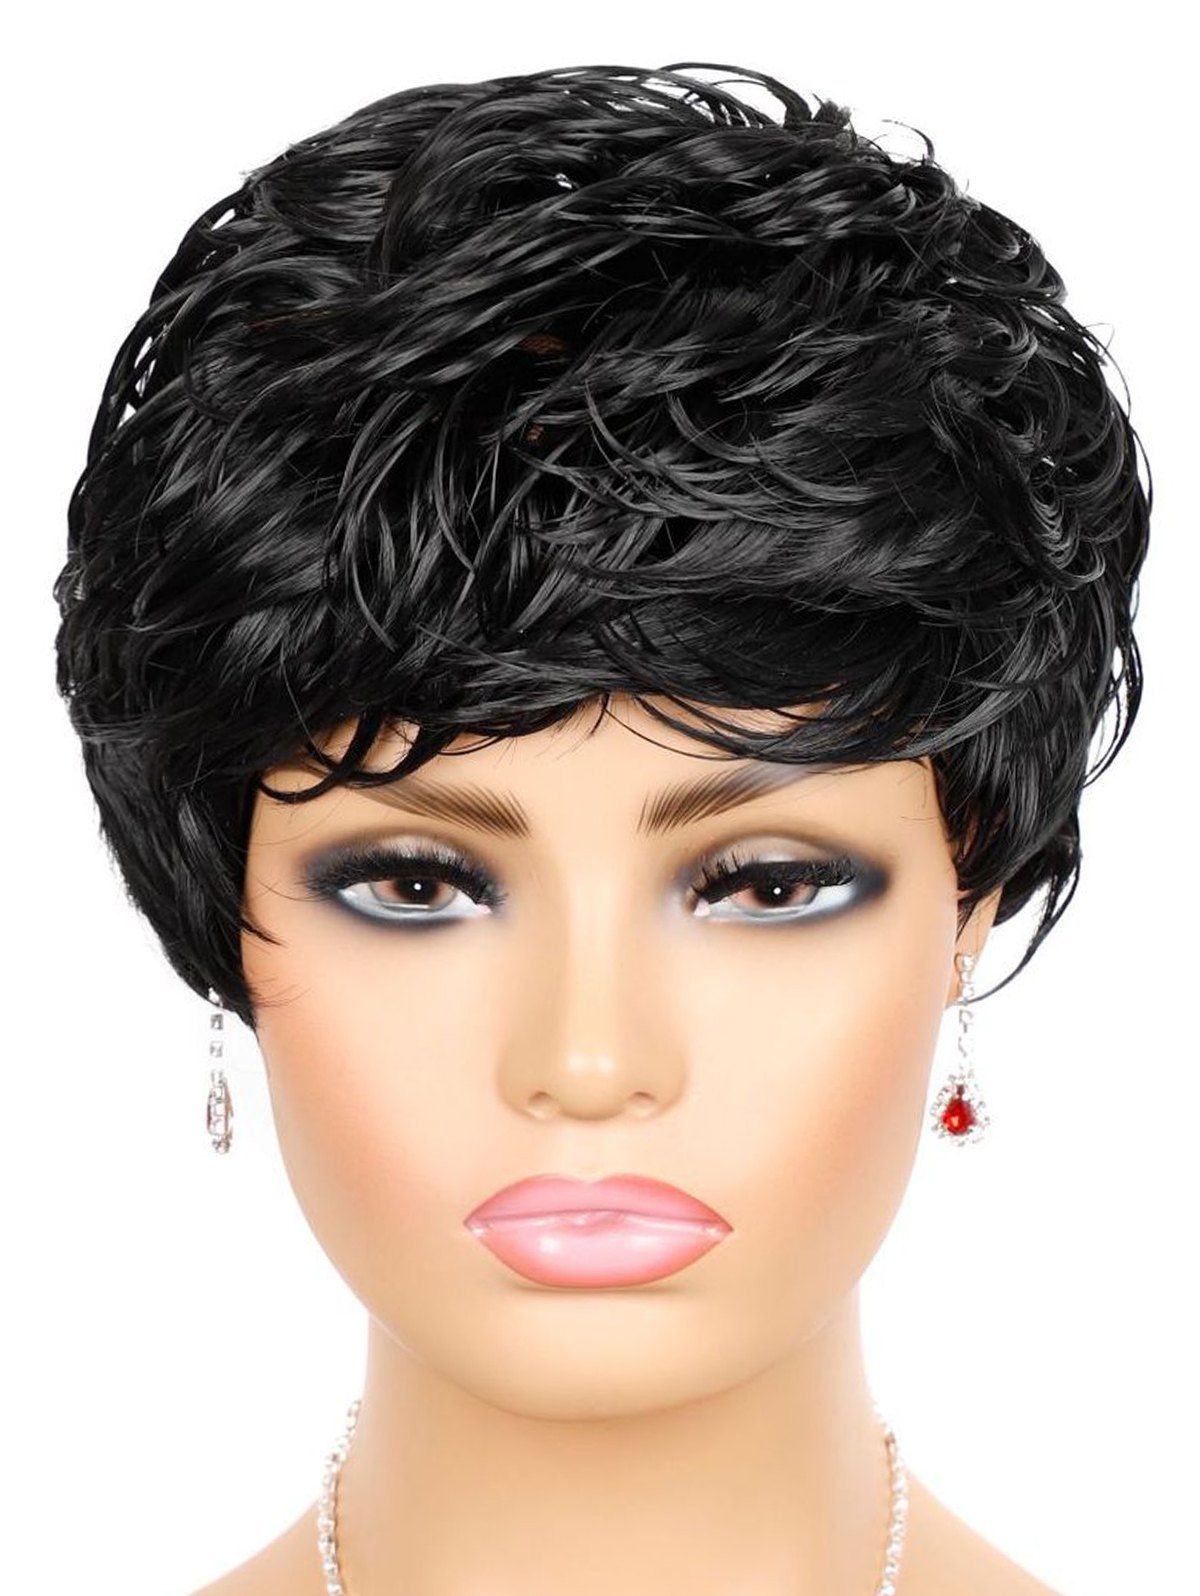 Short Inclined Bang Fluffy Curly Wavy High Temperature Fiber Synthetic Wig - BLACK 